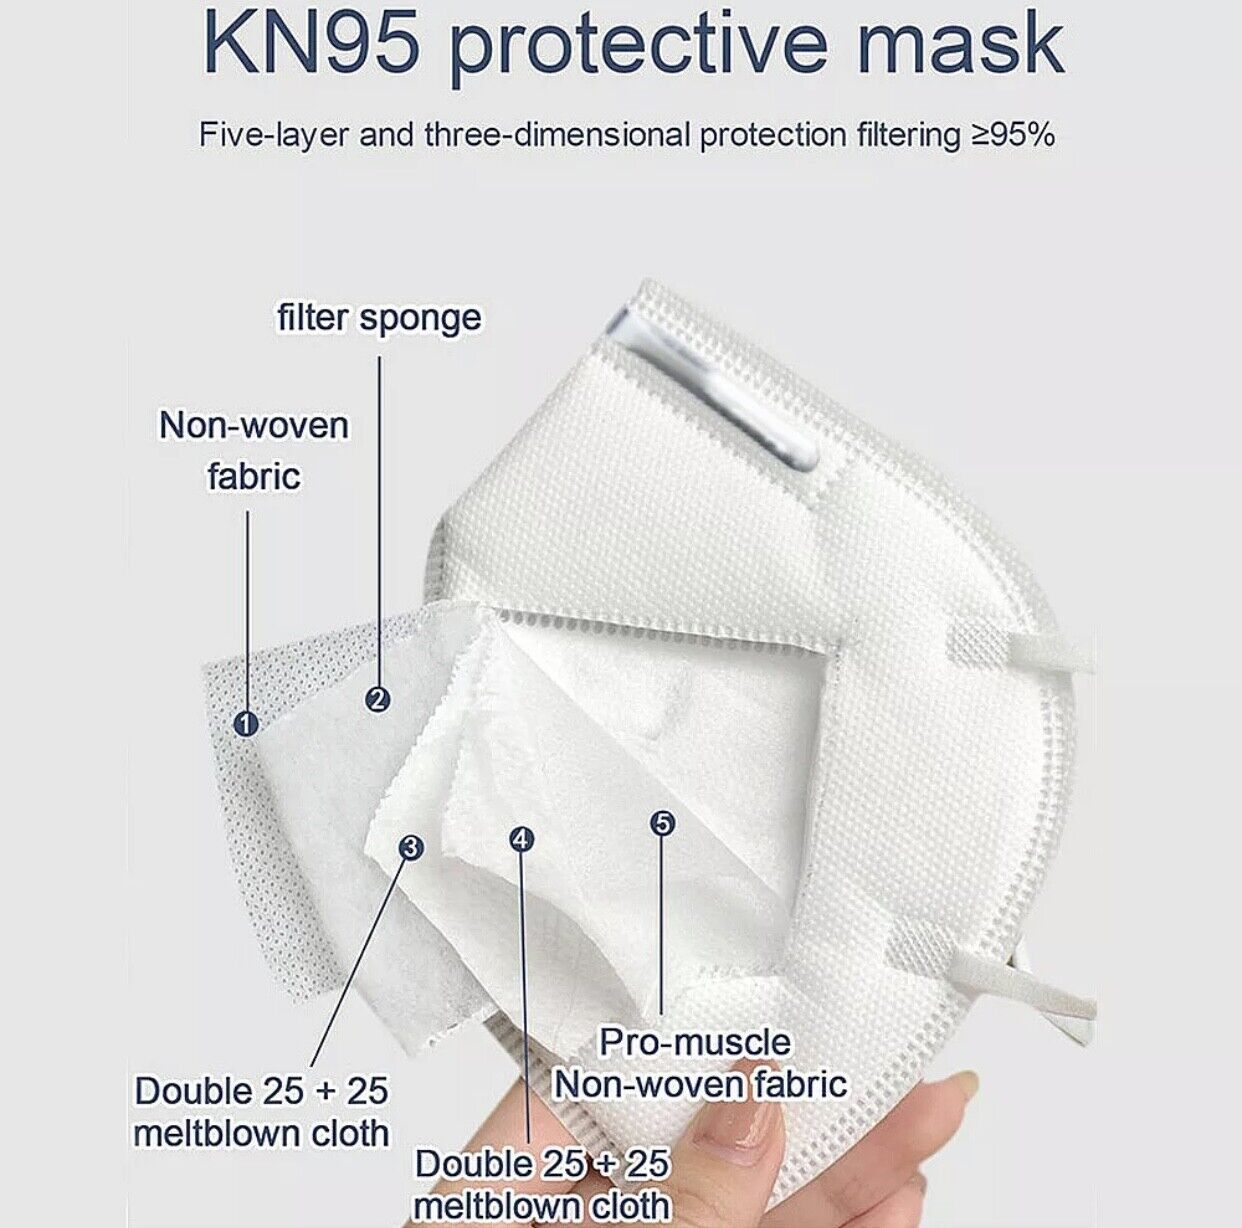 [100 PACK] KN95 Protective 5 Layer Face Mask BFE 95% PM2.5 Disposable Respirator Unbranded KN95-FACE-MASK-X100 - фотография #4